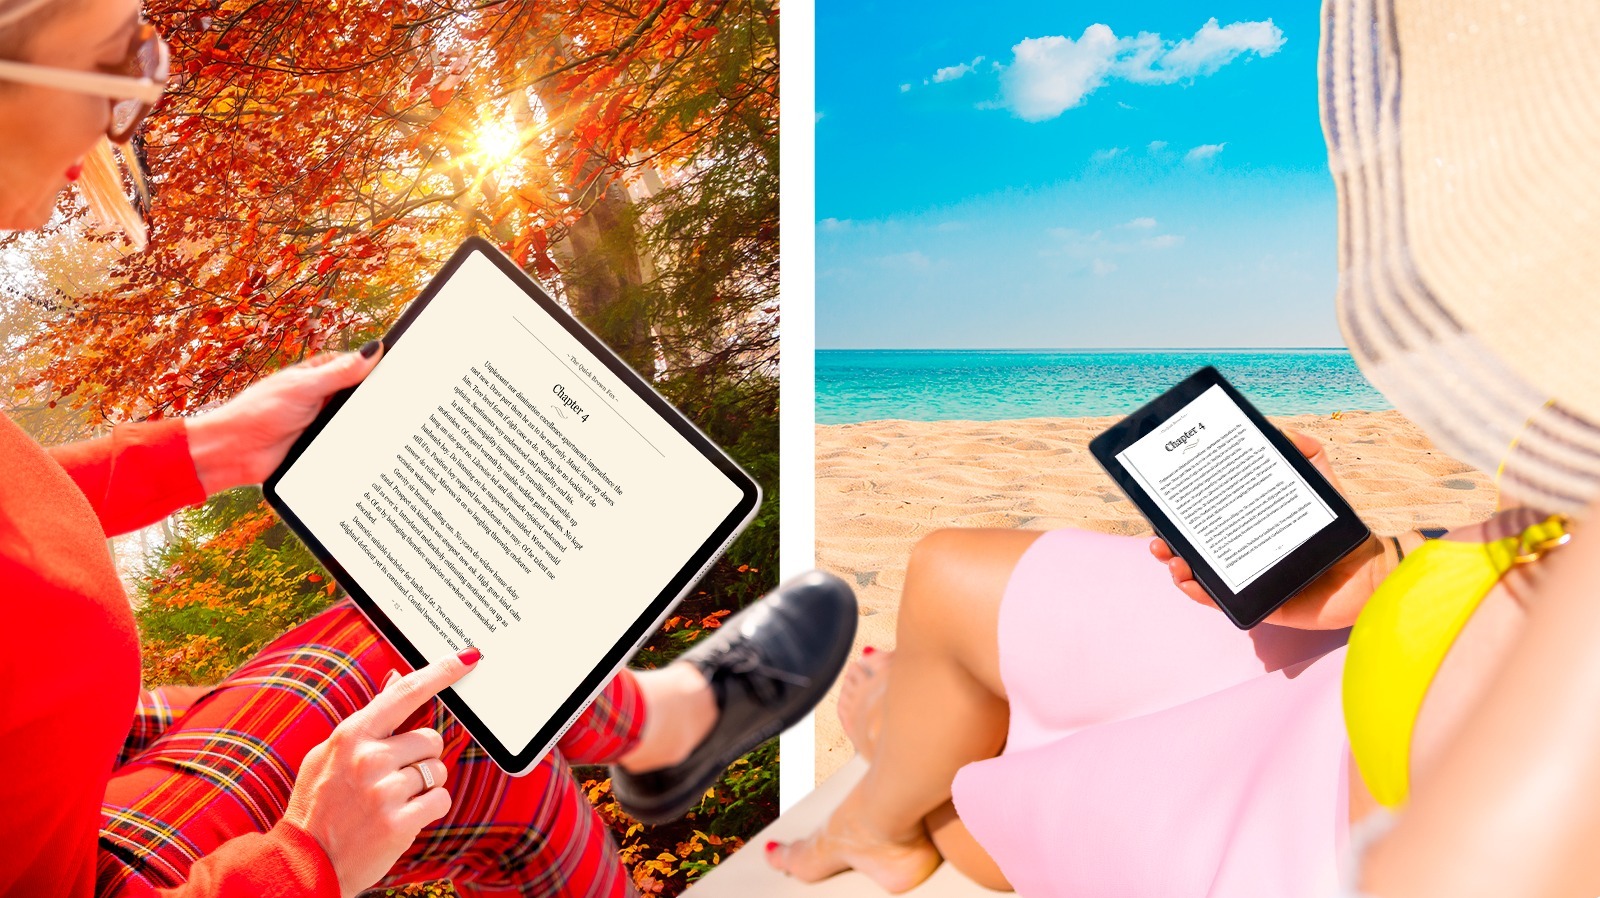 15 Kindle Tips & Tricks To Know To Maximize Your Reading Time